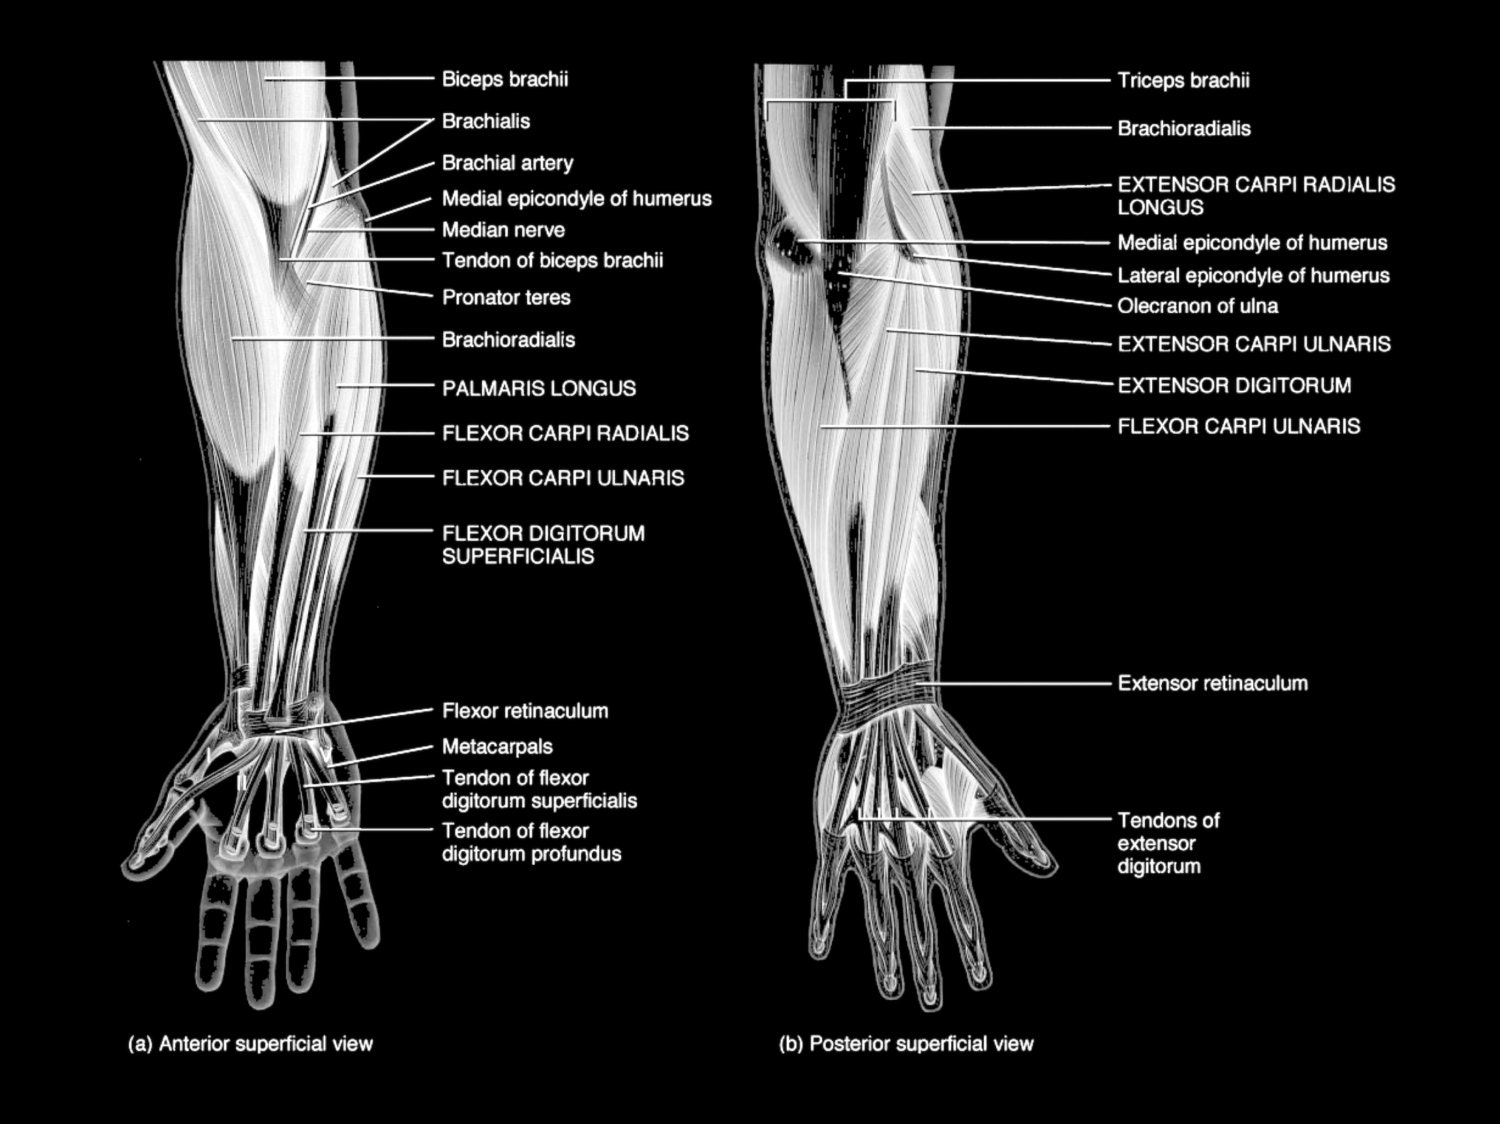 Muscles and Tendons of the Arm Art Print Poster Medical